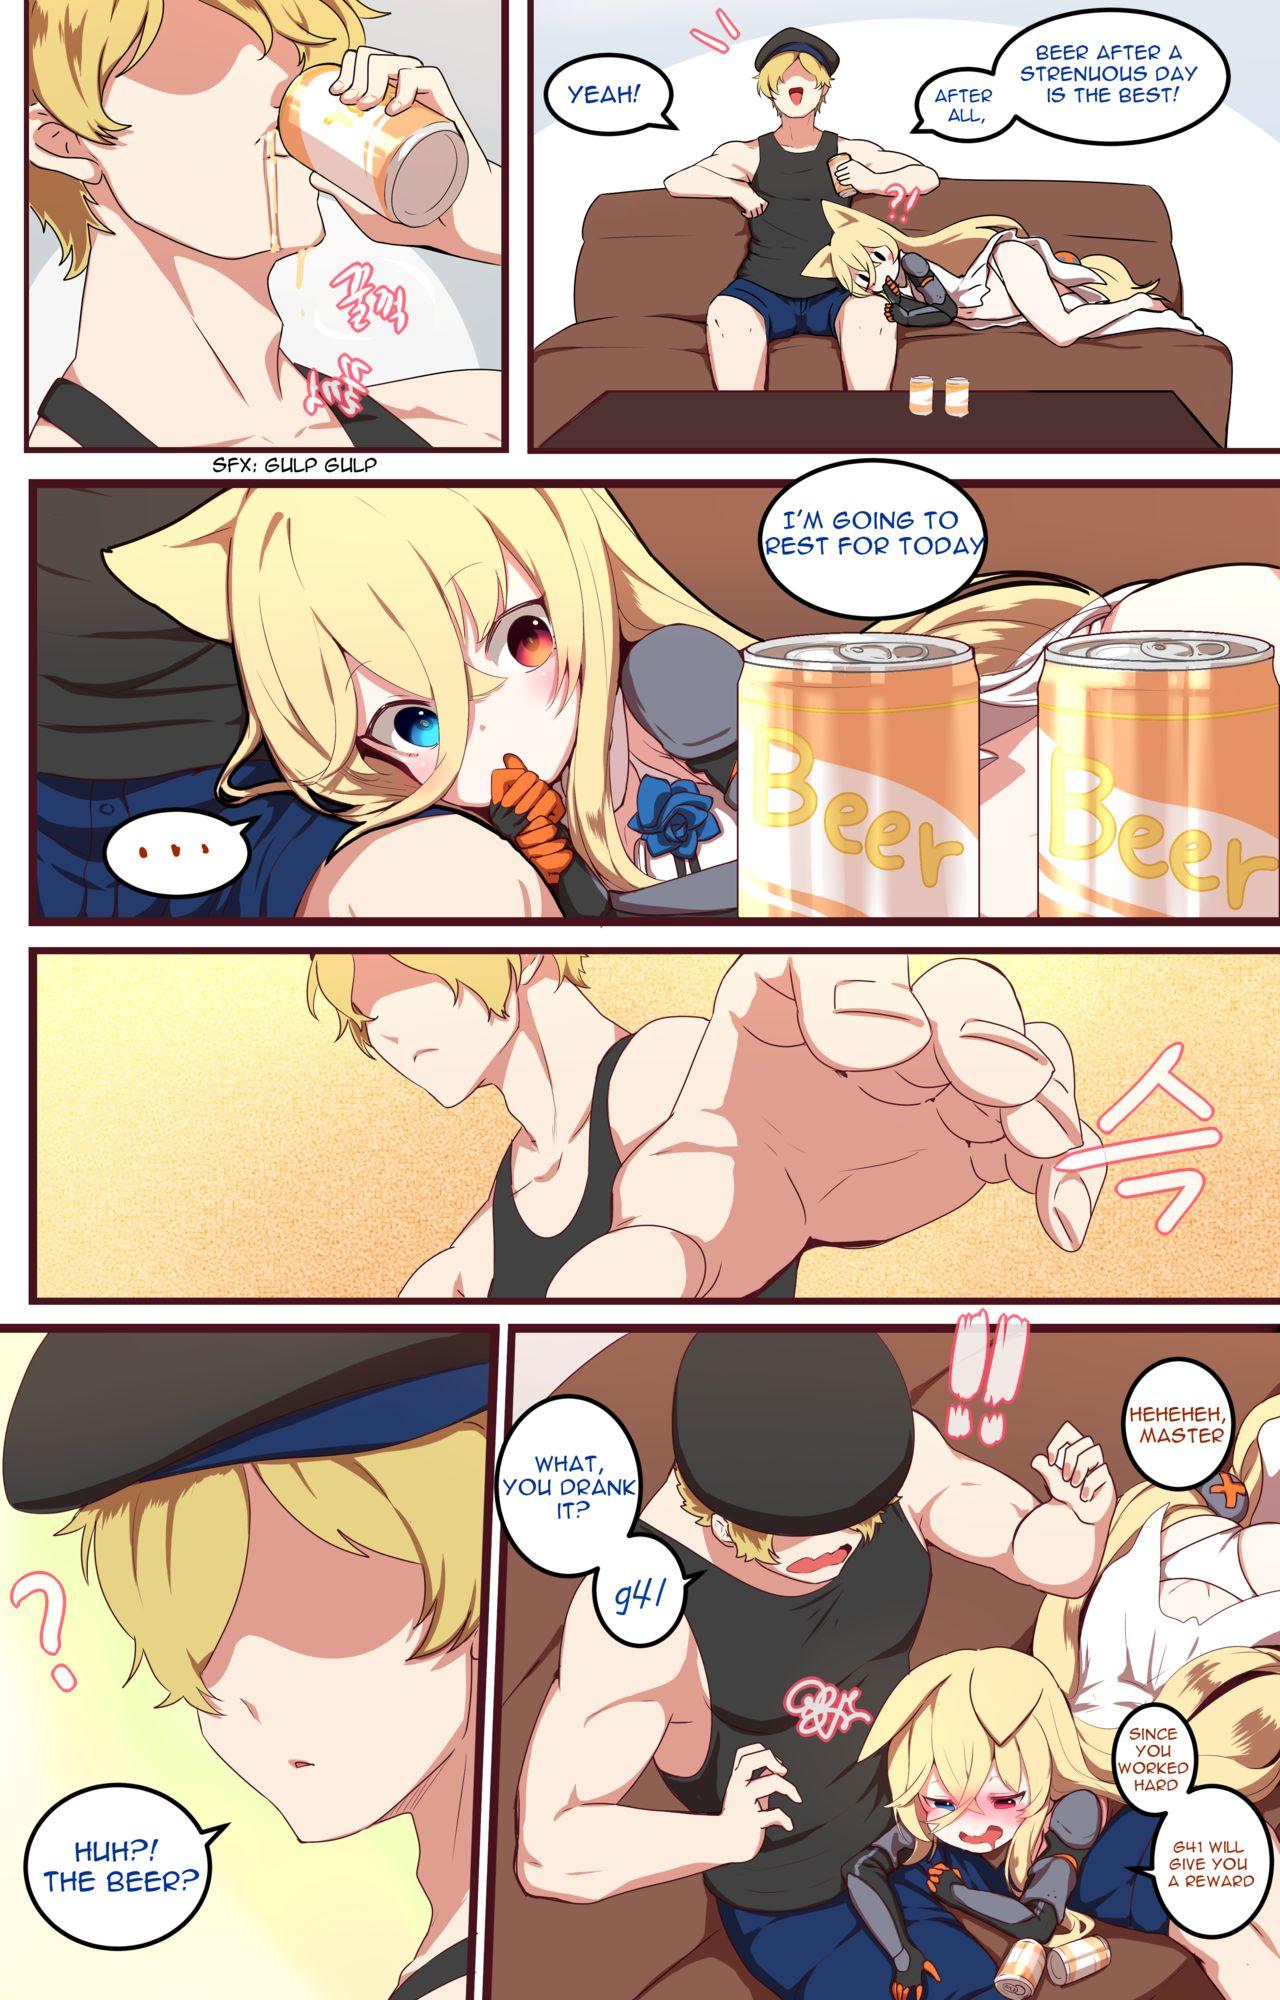 Swing How to Use Dolls 04 - Girls frontline Gay Clinic - Page 5